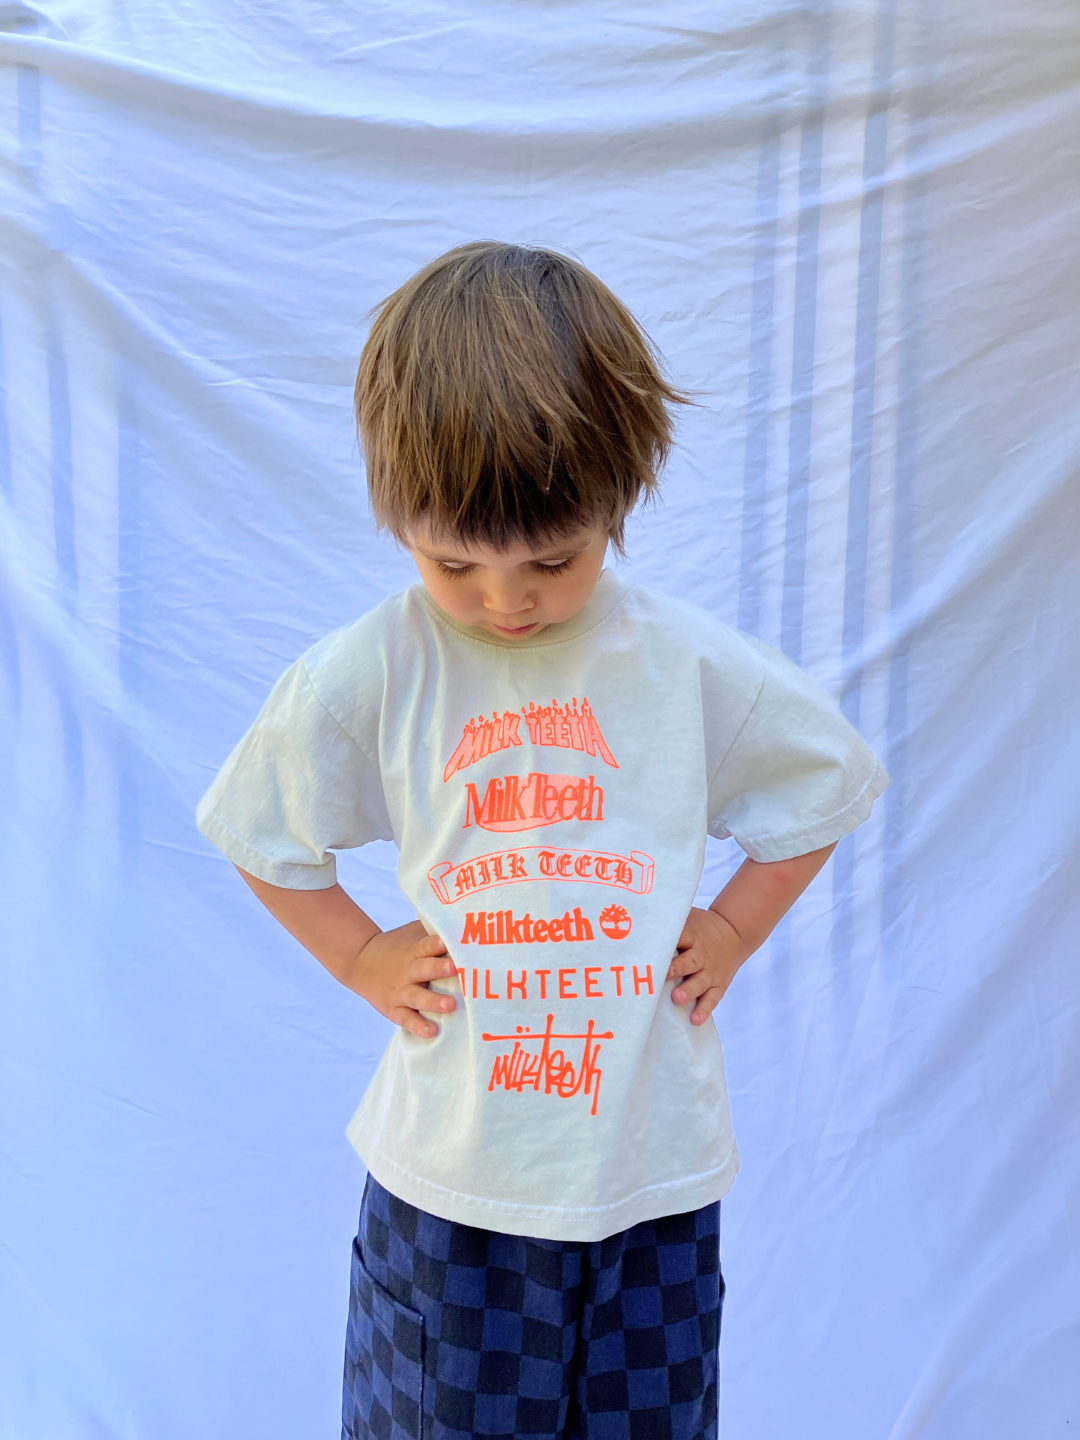 A child wearing a light grey t-shirt with Milk Teeth spelled out in various fonts in orange ink. He wears navy and black checkered pants and is standing in front of a white sheet backdrop.